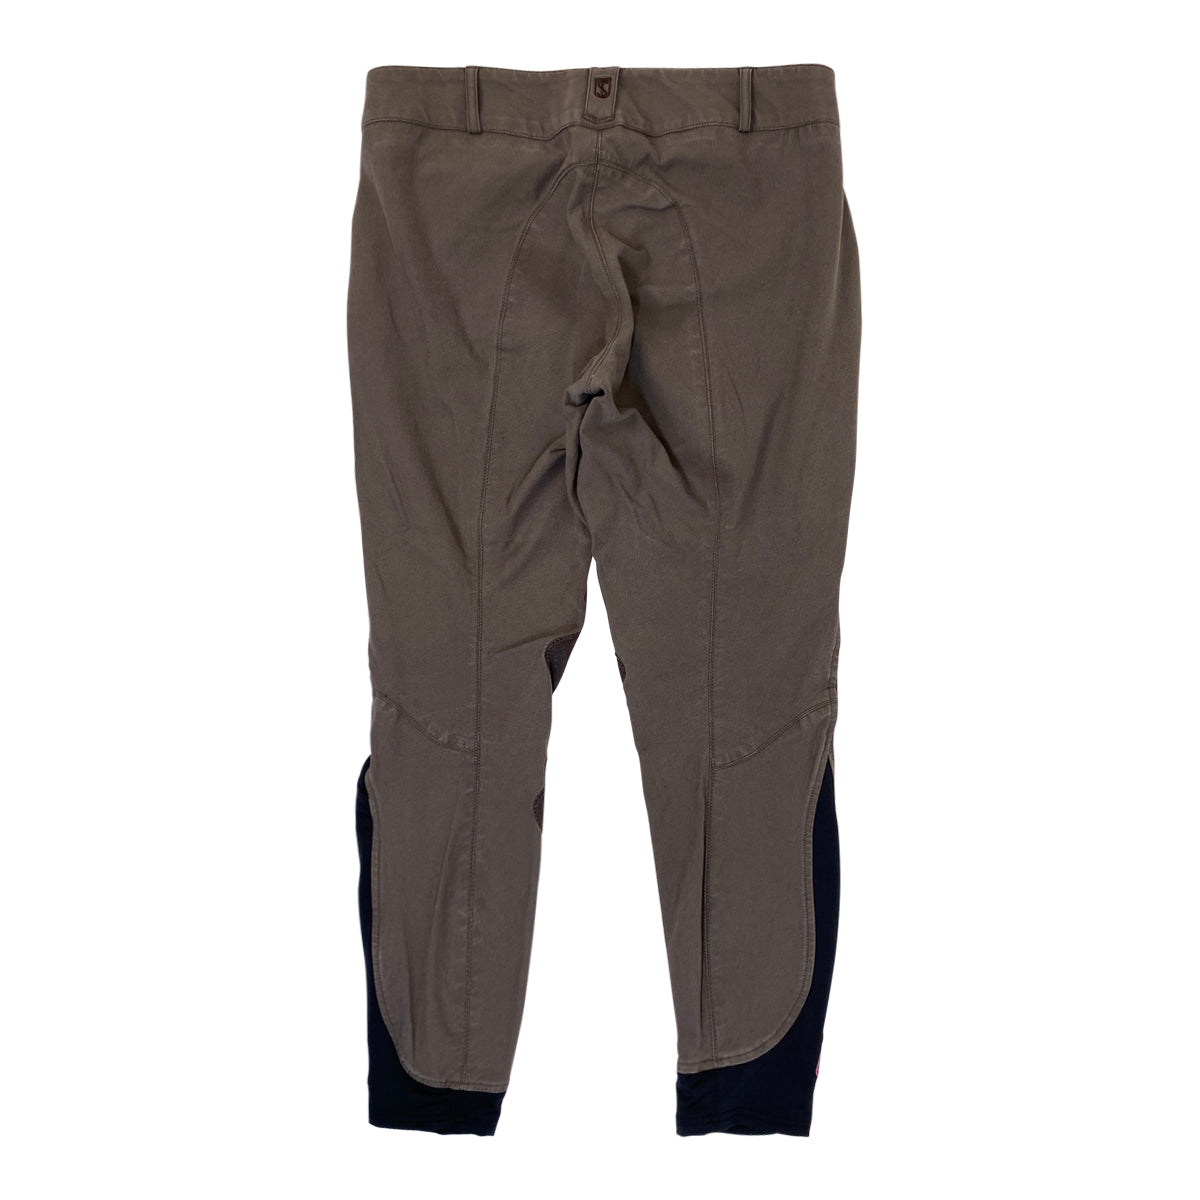 Tredstep 'Symphony Nero II' Knee Patch Breeches in Brown